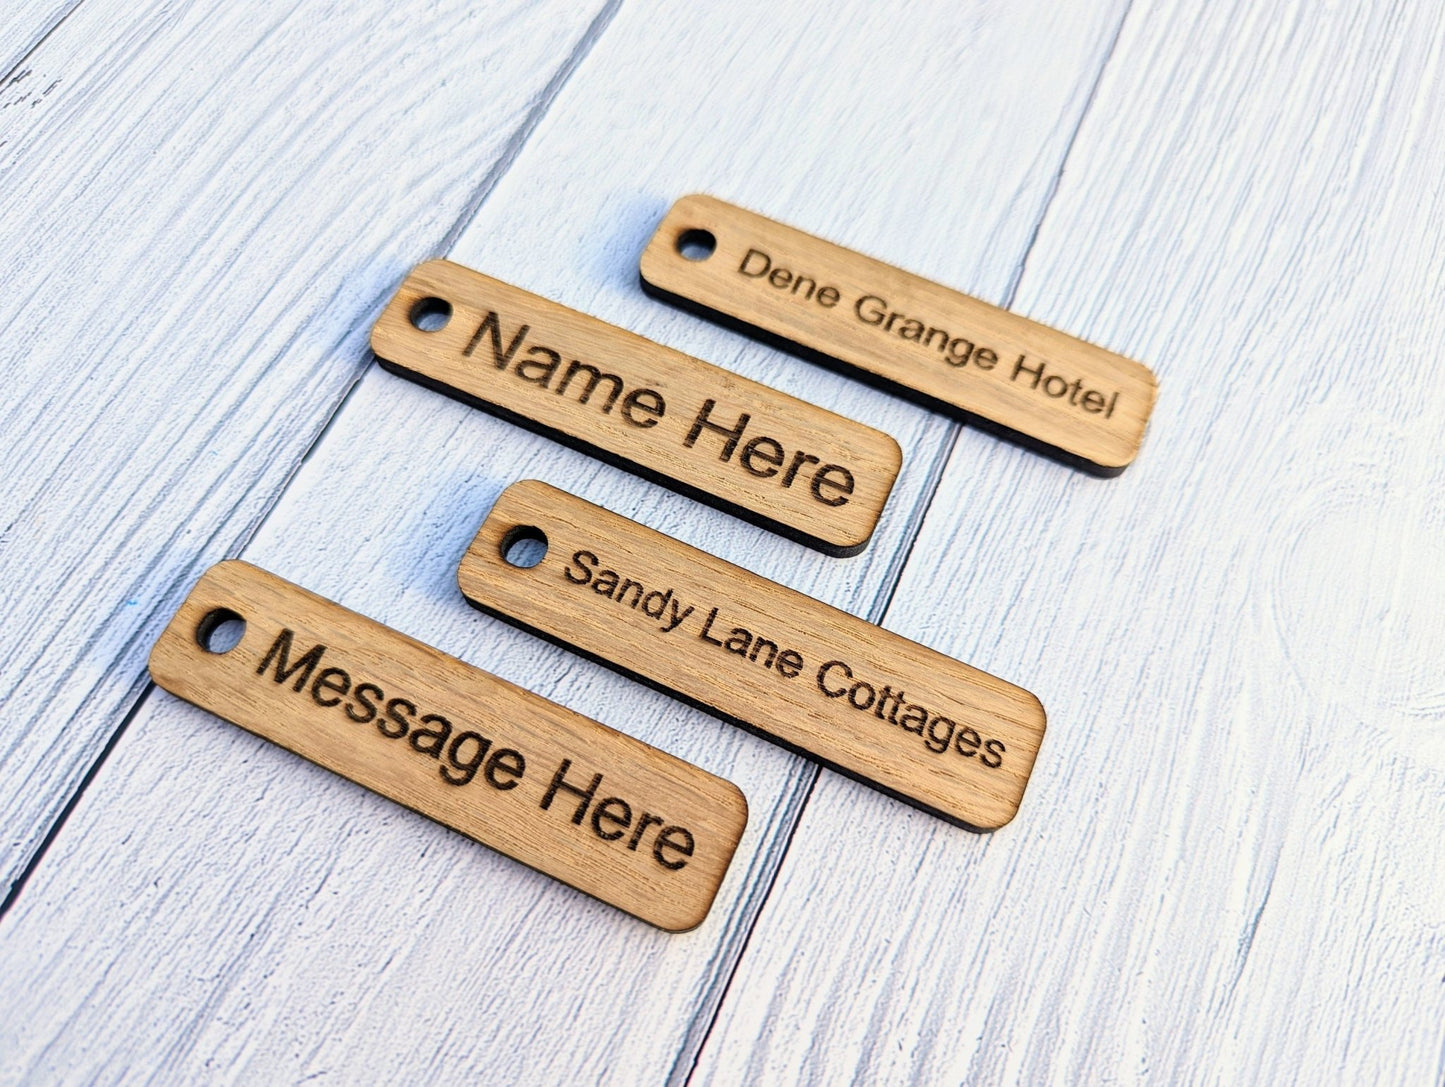 Eco-Friendly Wooden Keychains, Personalised Keyrings for Every Occasion, Custom Keyfobs, Wood Engraved Keychains, Bulk Orders Available - CherryGroveCraft